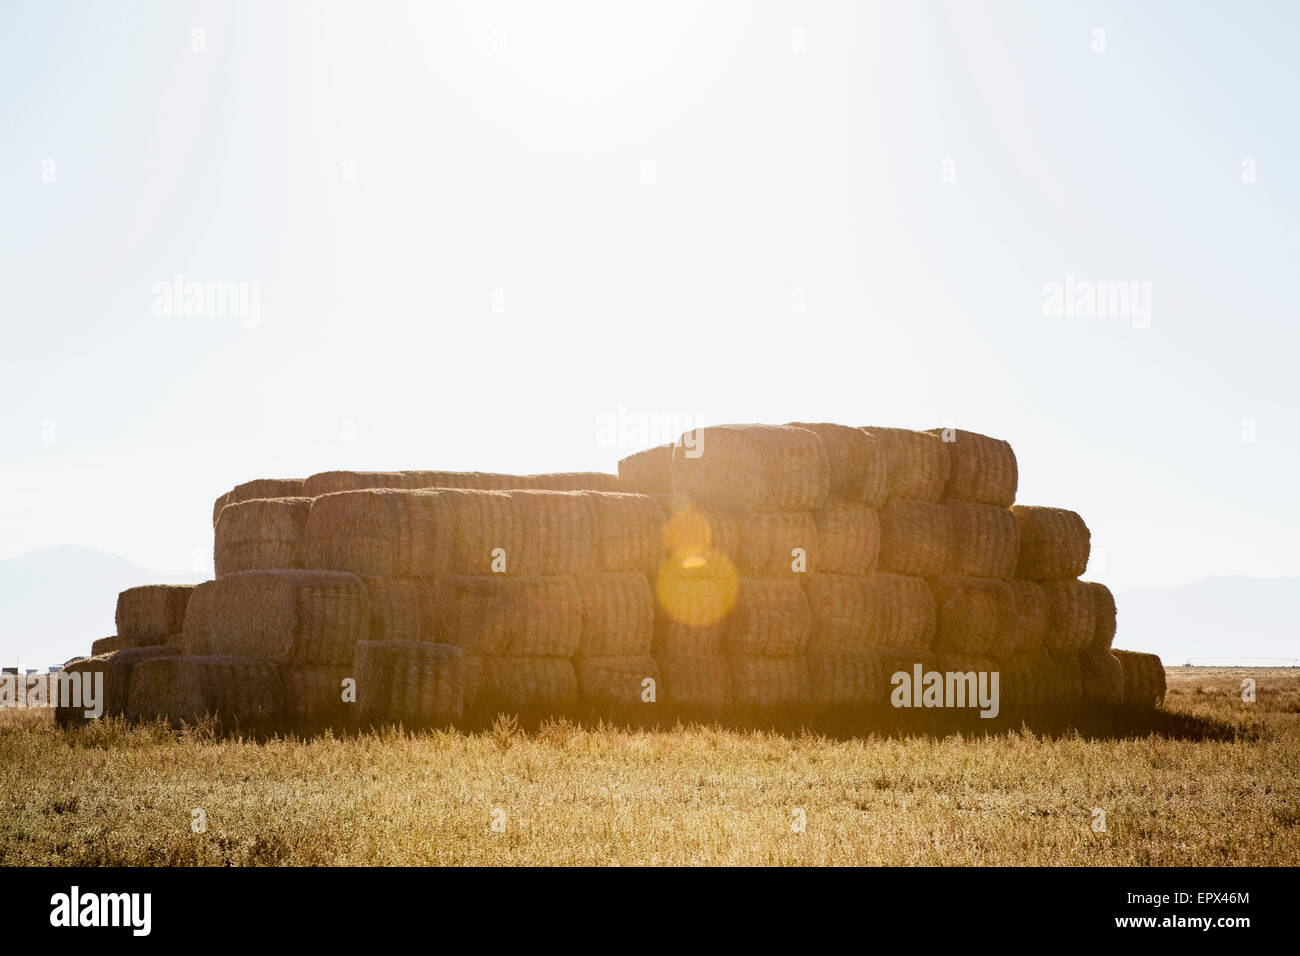 USA, Colorado, Stack of bales in field Stock Photo